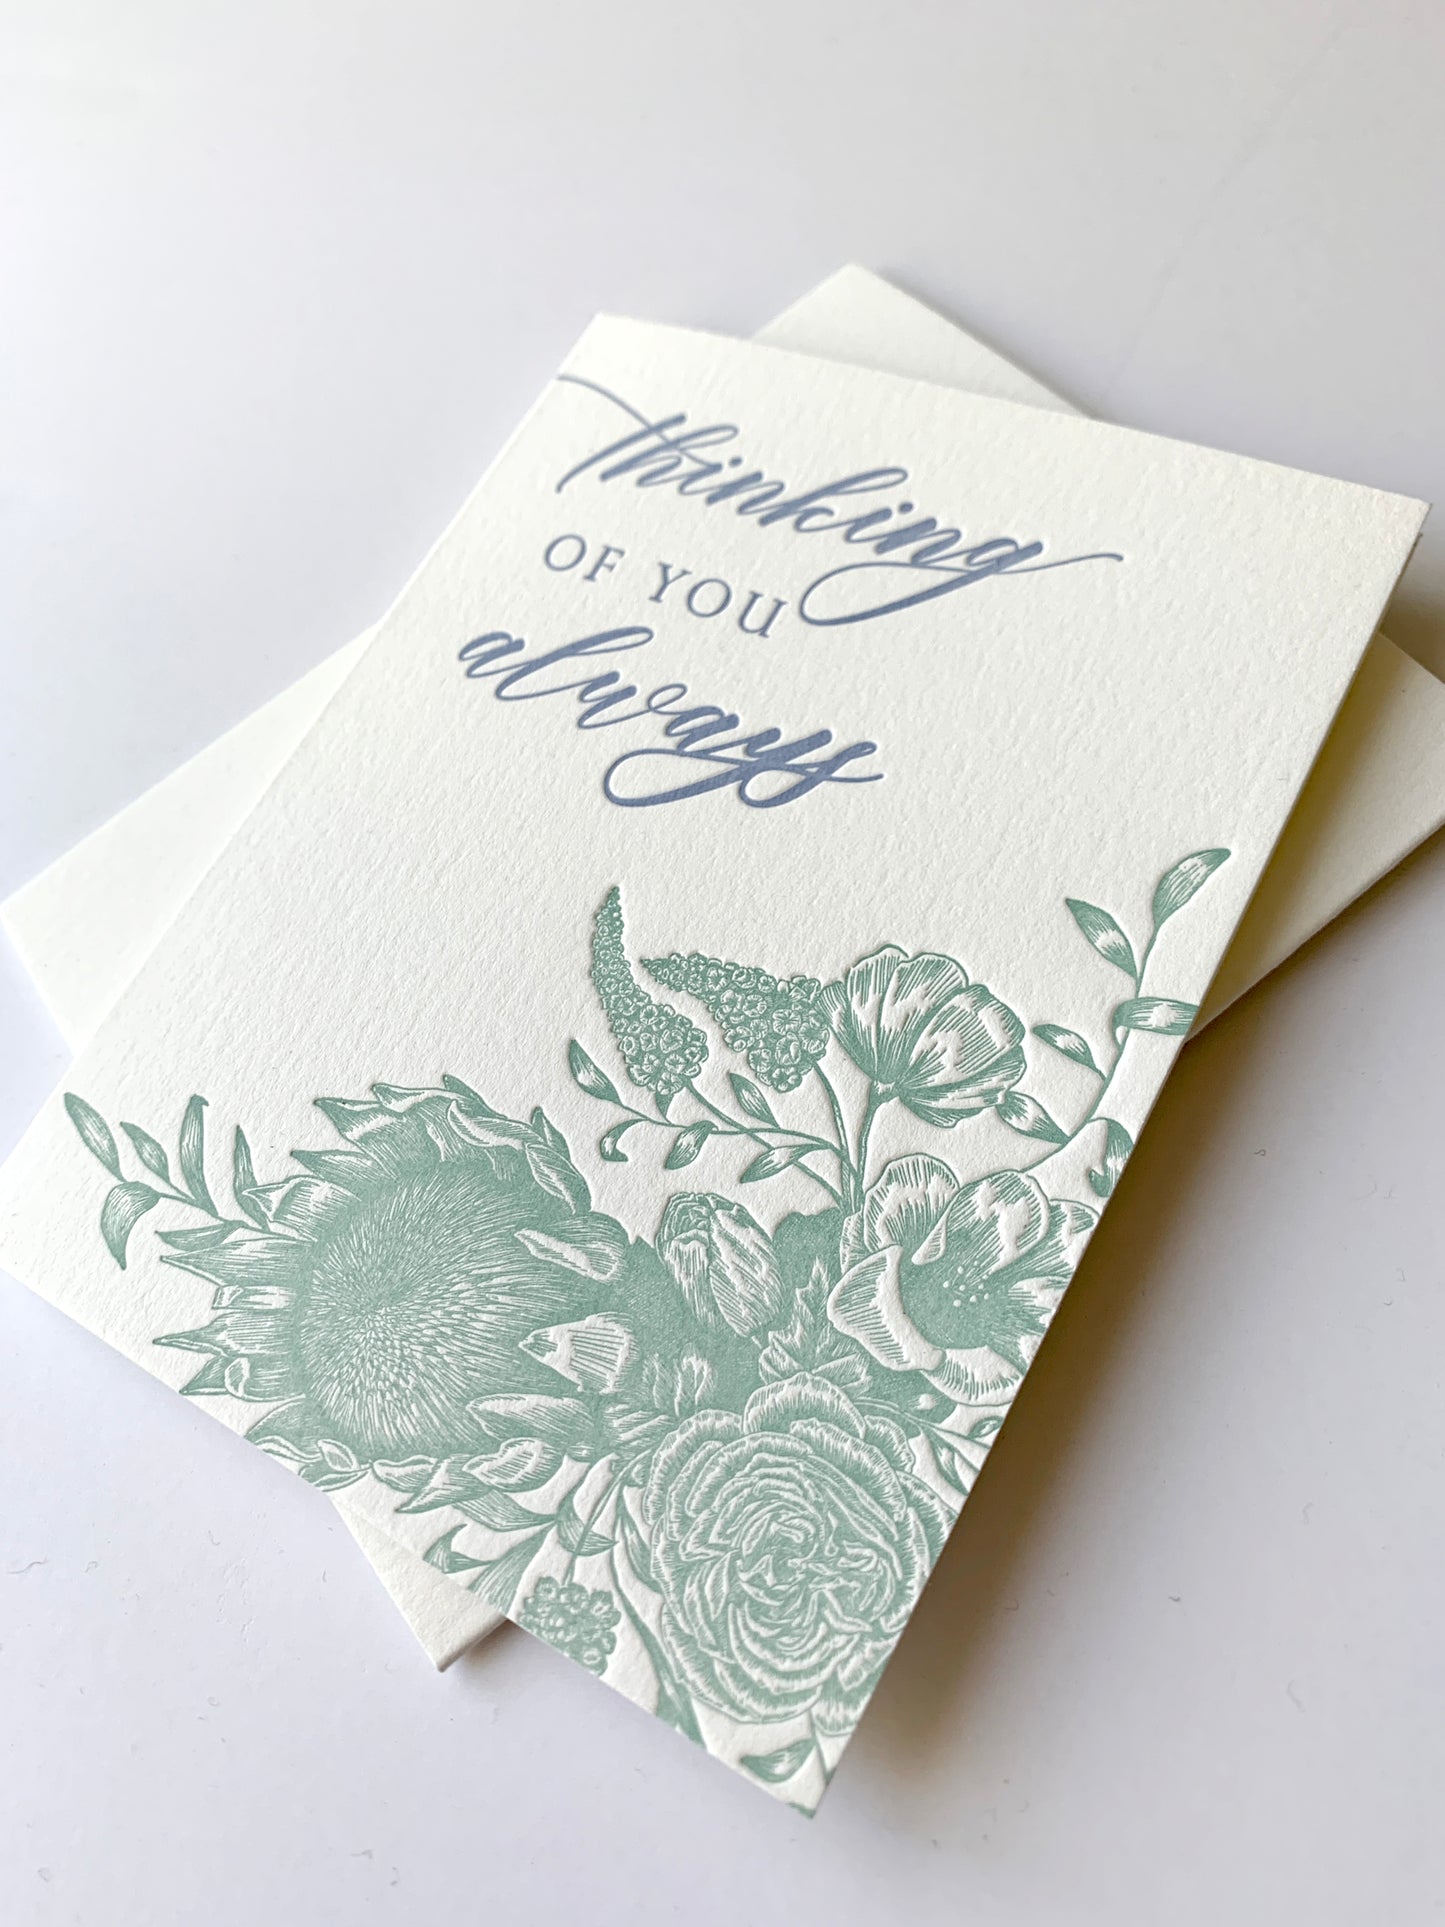 Letterpress friendship card with florals that says "thinking of you always" by Rust Belt Love